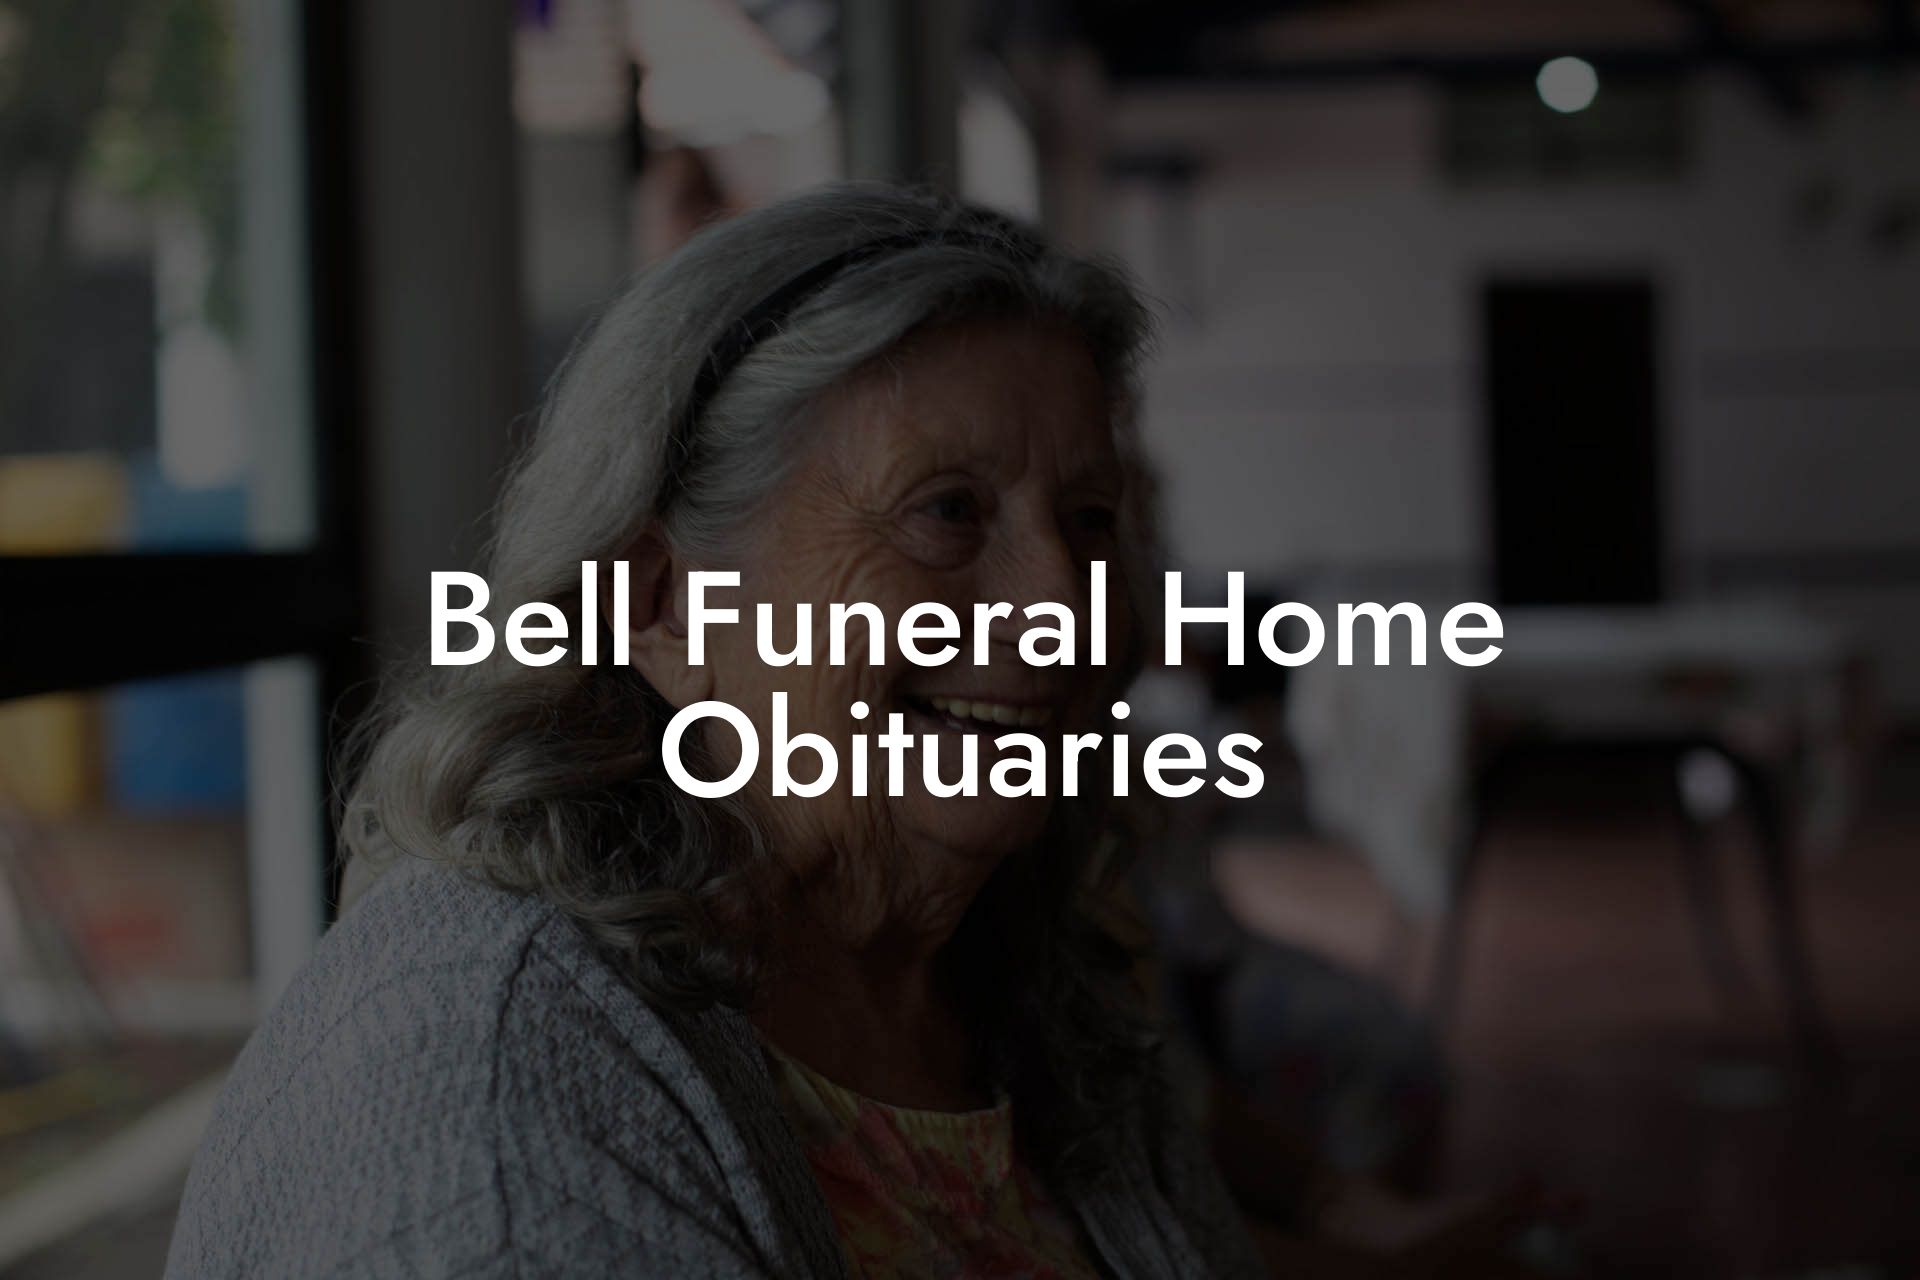 Bell Funeral Home Obituaries